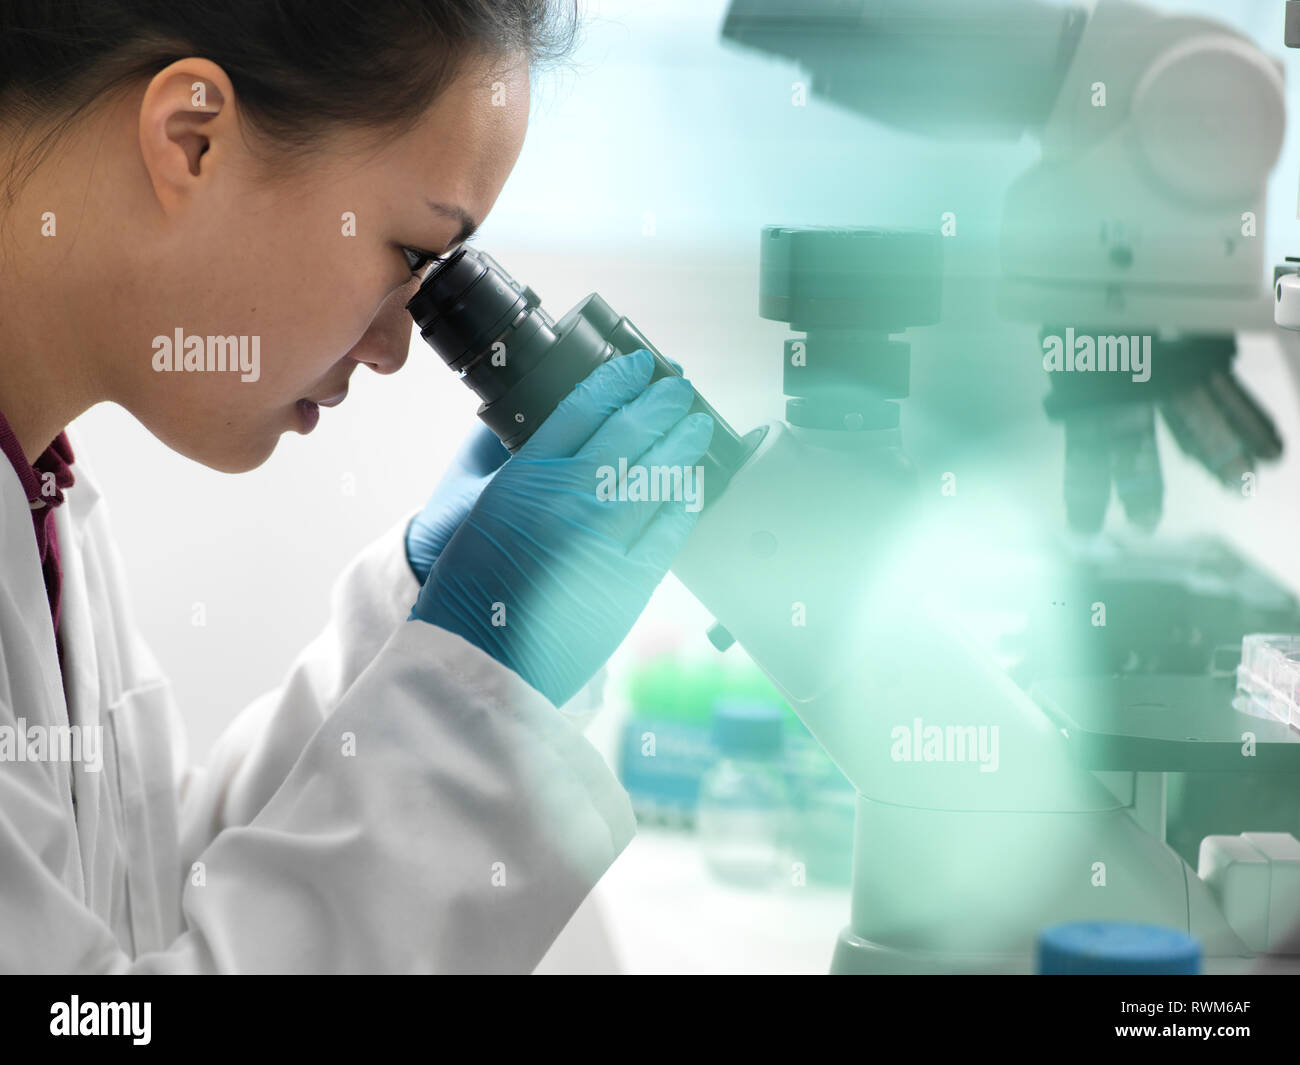 Scientist viewing sample through microscope during experiment in laboratory Stock Photo